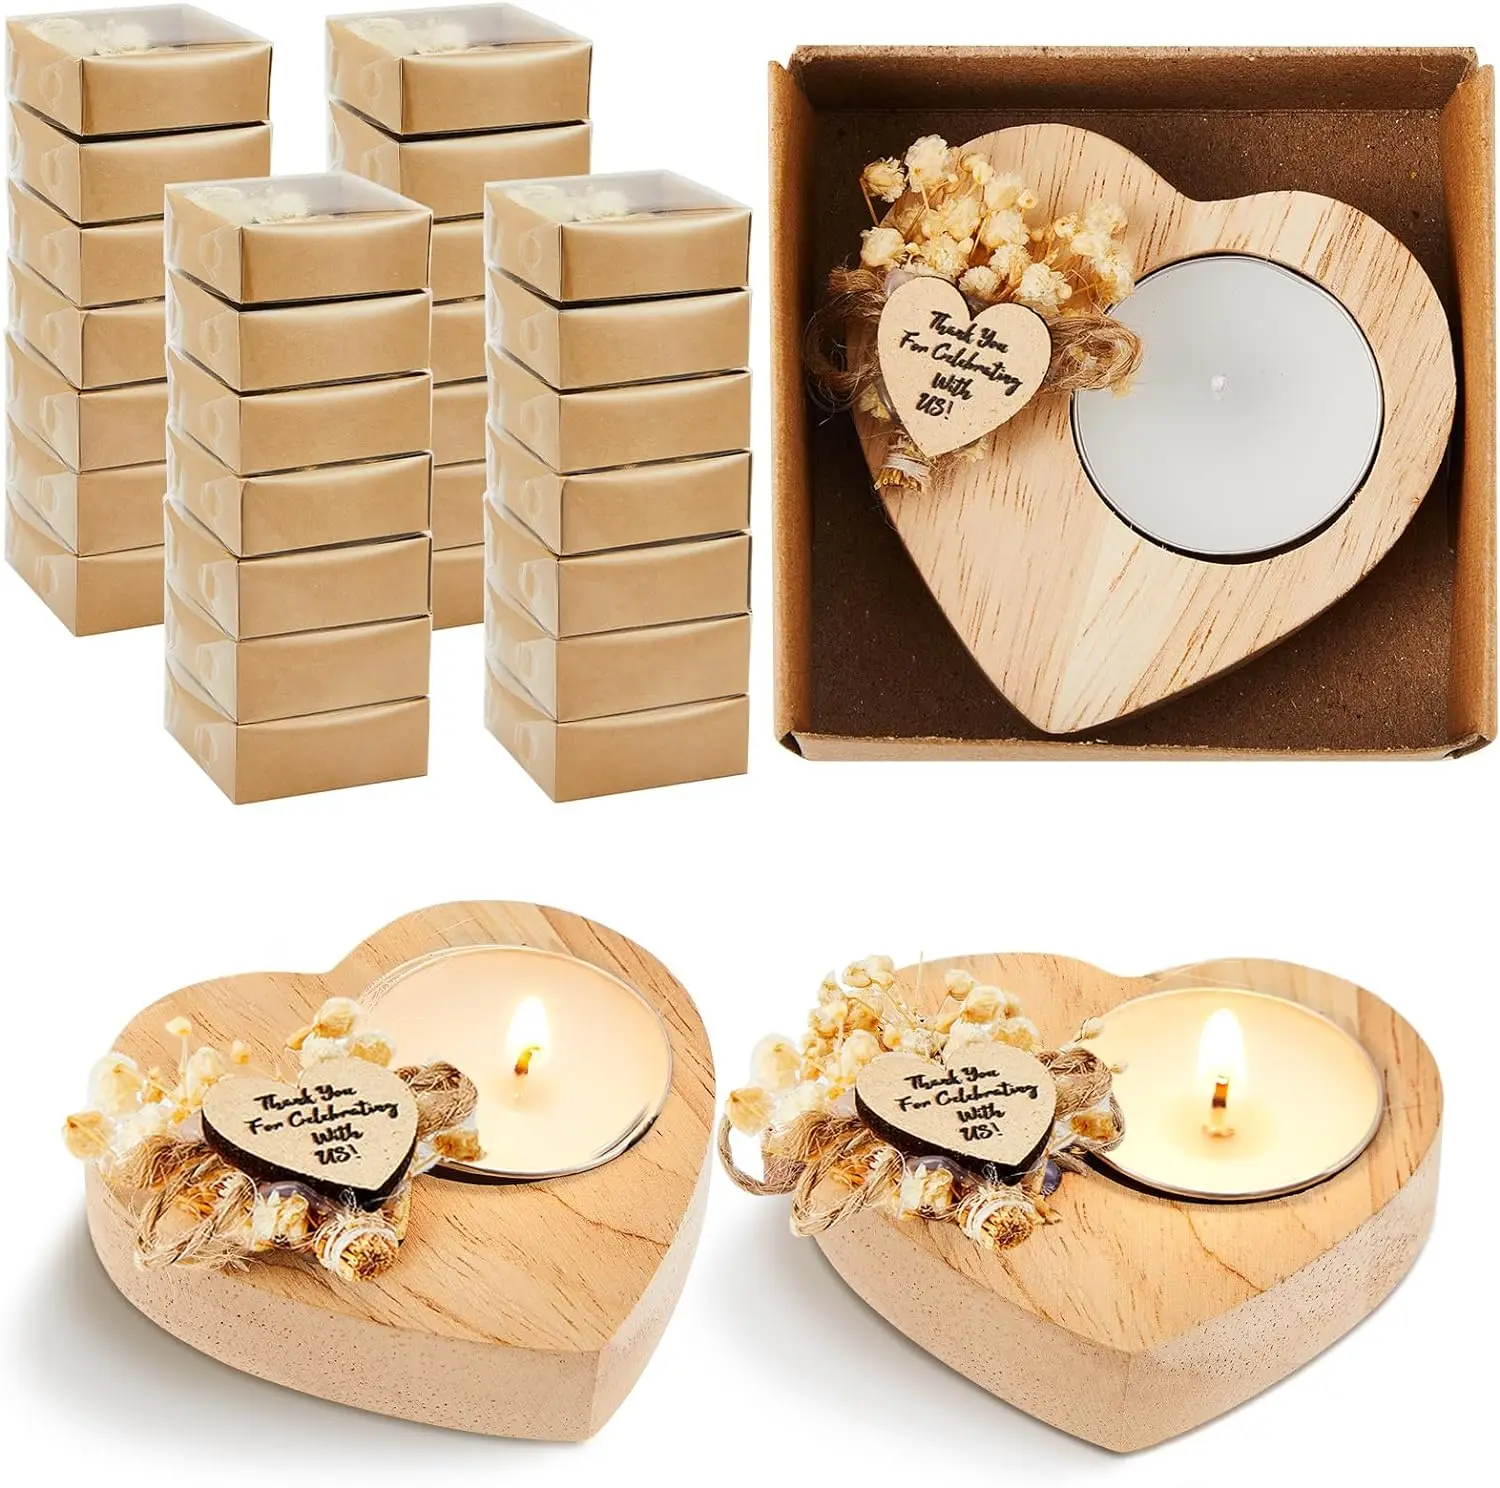 6-50Pcs Bridal Shower Favors Candles Heart Shaped Wood Tealight Candle Holder Rustic Wedding Candles for Guests Thanksgiving